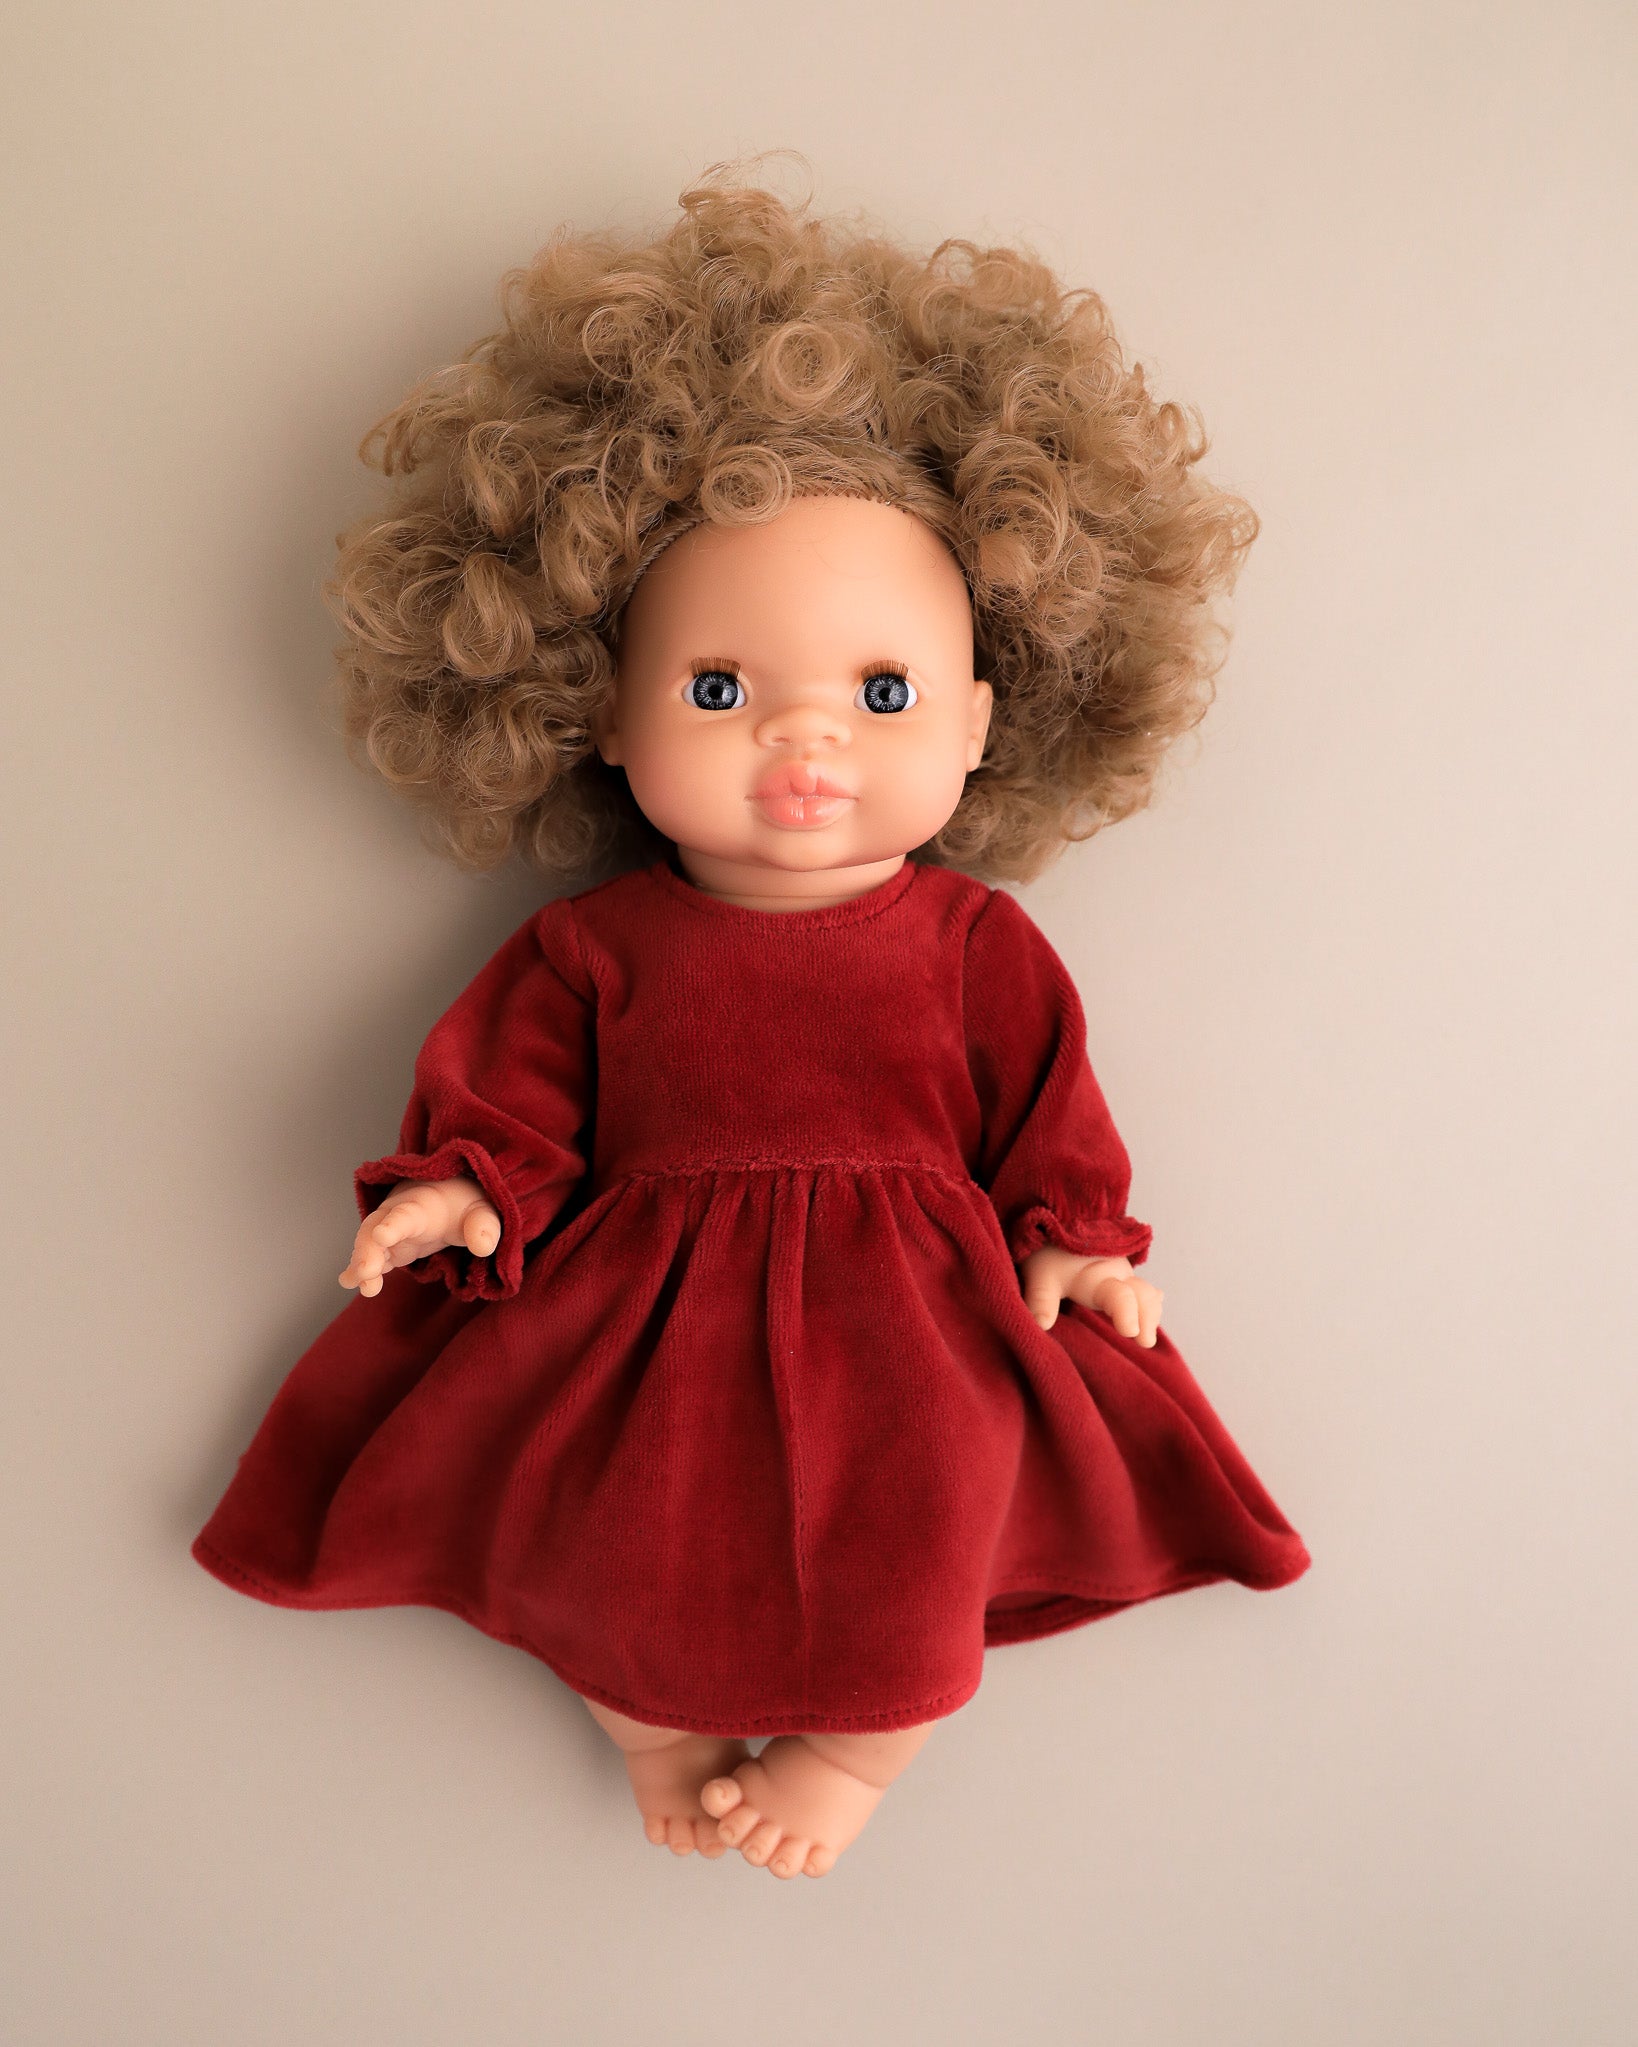 doll dress, doll clothes, clothes for dolls, dress up, doll accessories, minikane dolls, minikane doll clothes